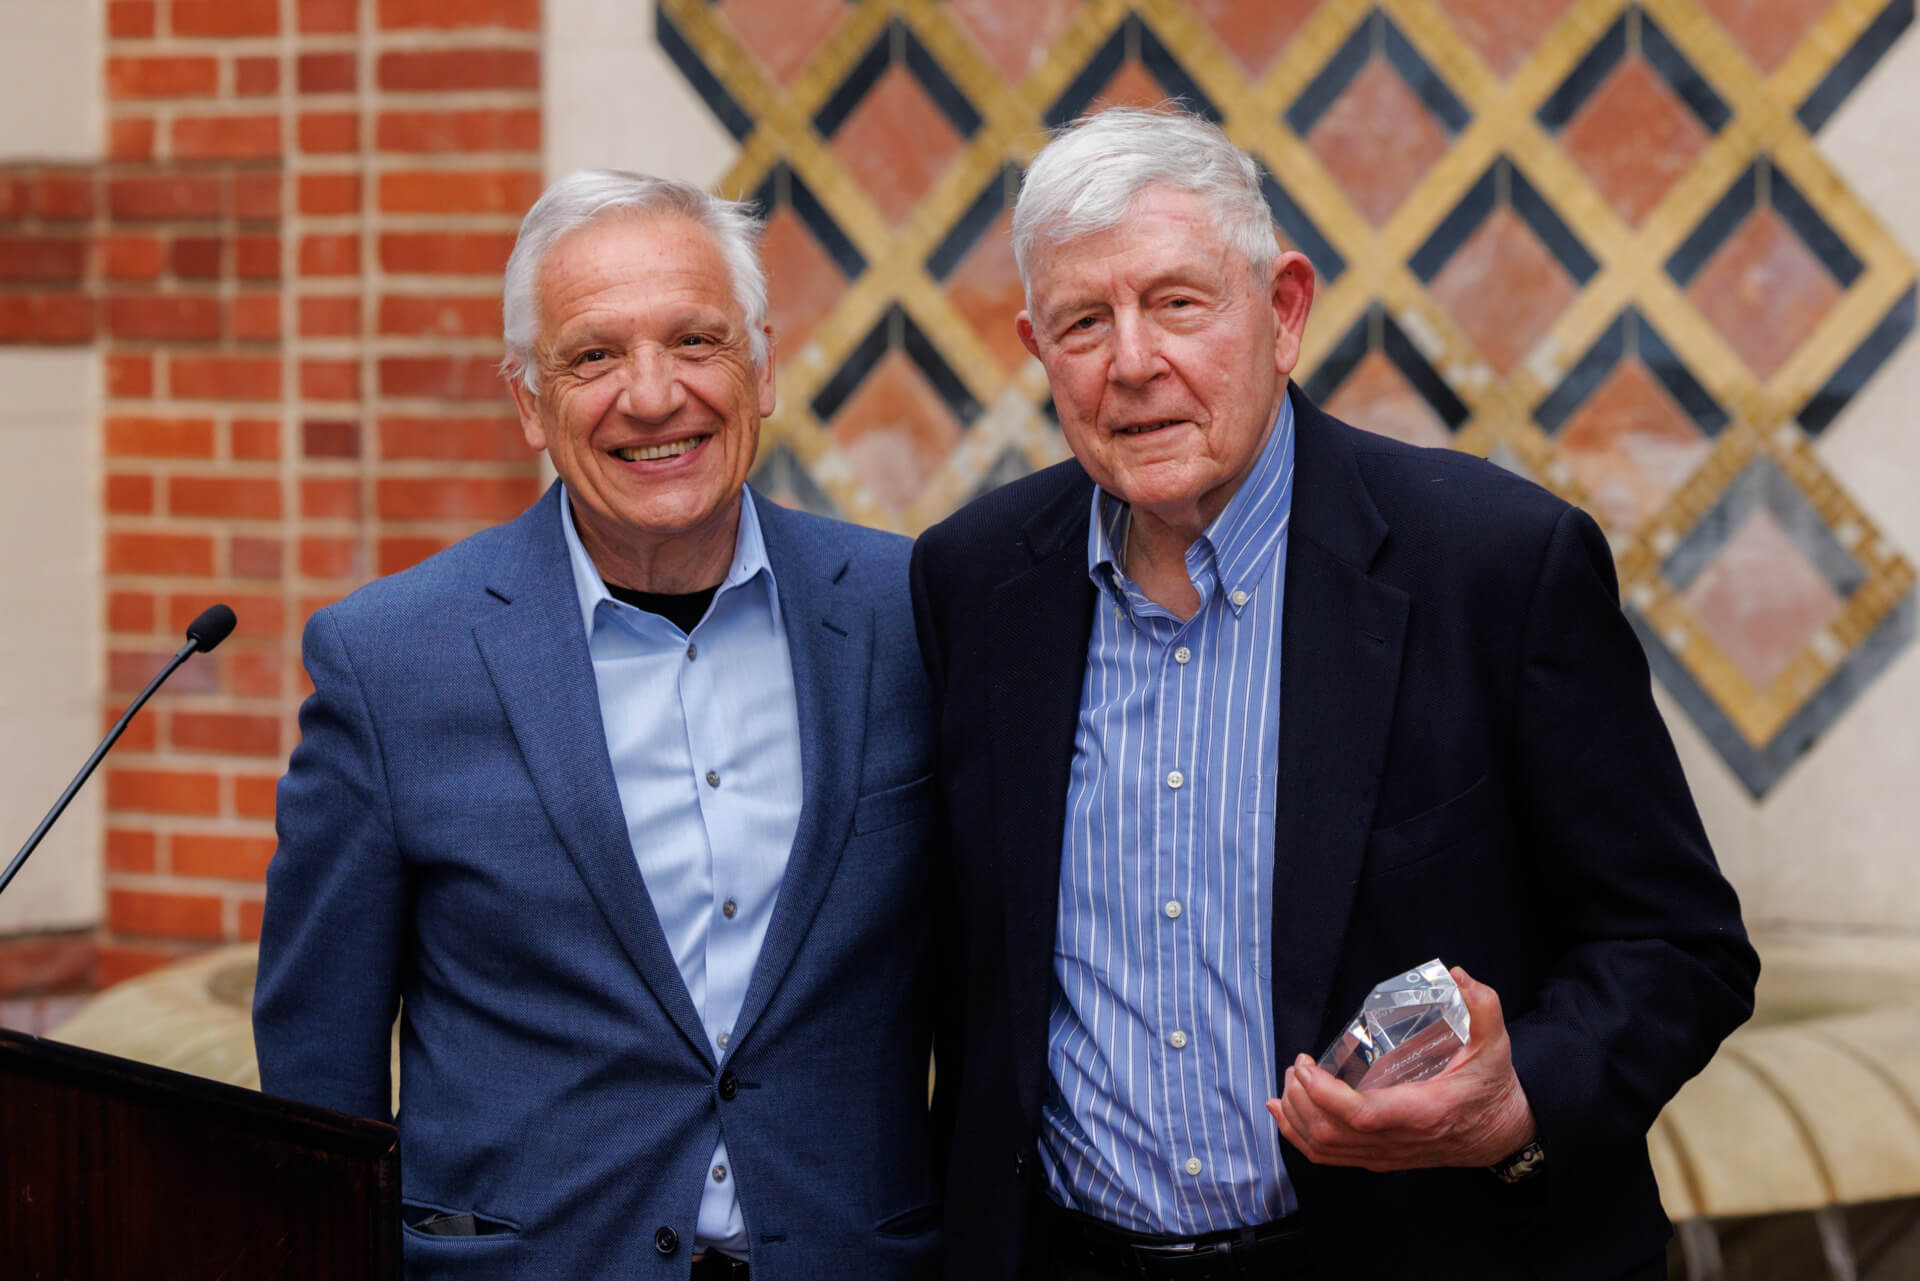 On March 25, USC Viterbi’s Dean Yannis Yortsos hosted a career celebration of former ISI Executive Director Herb Schorr (Photo/Brian Morri)